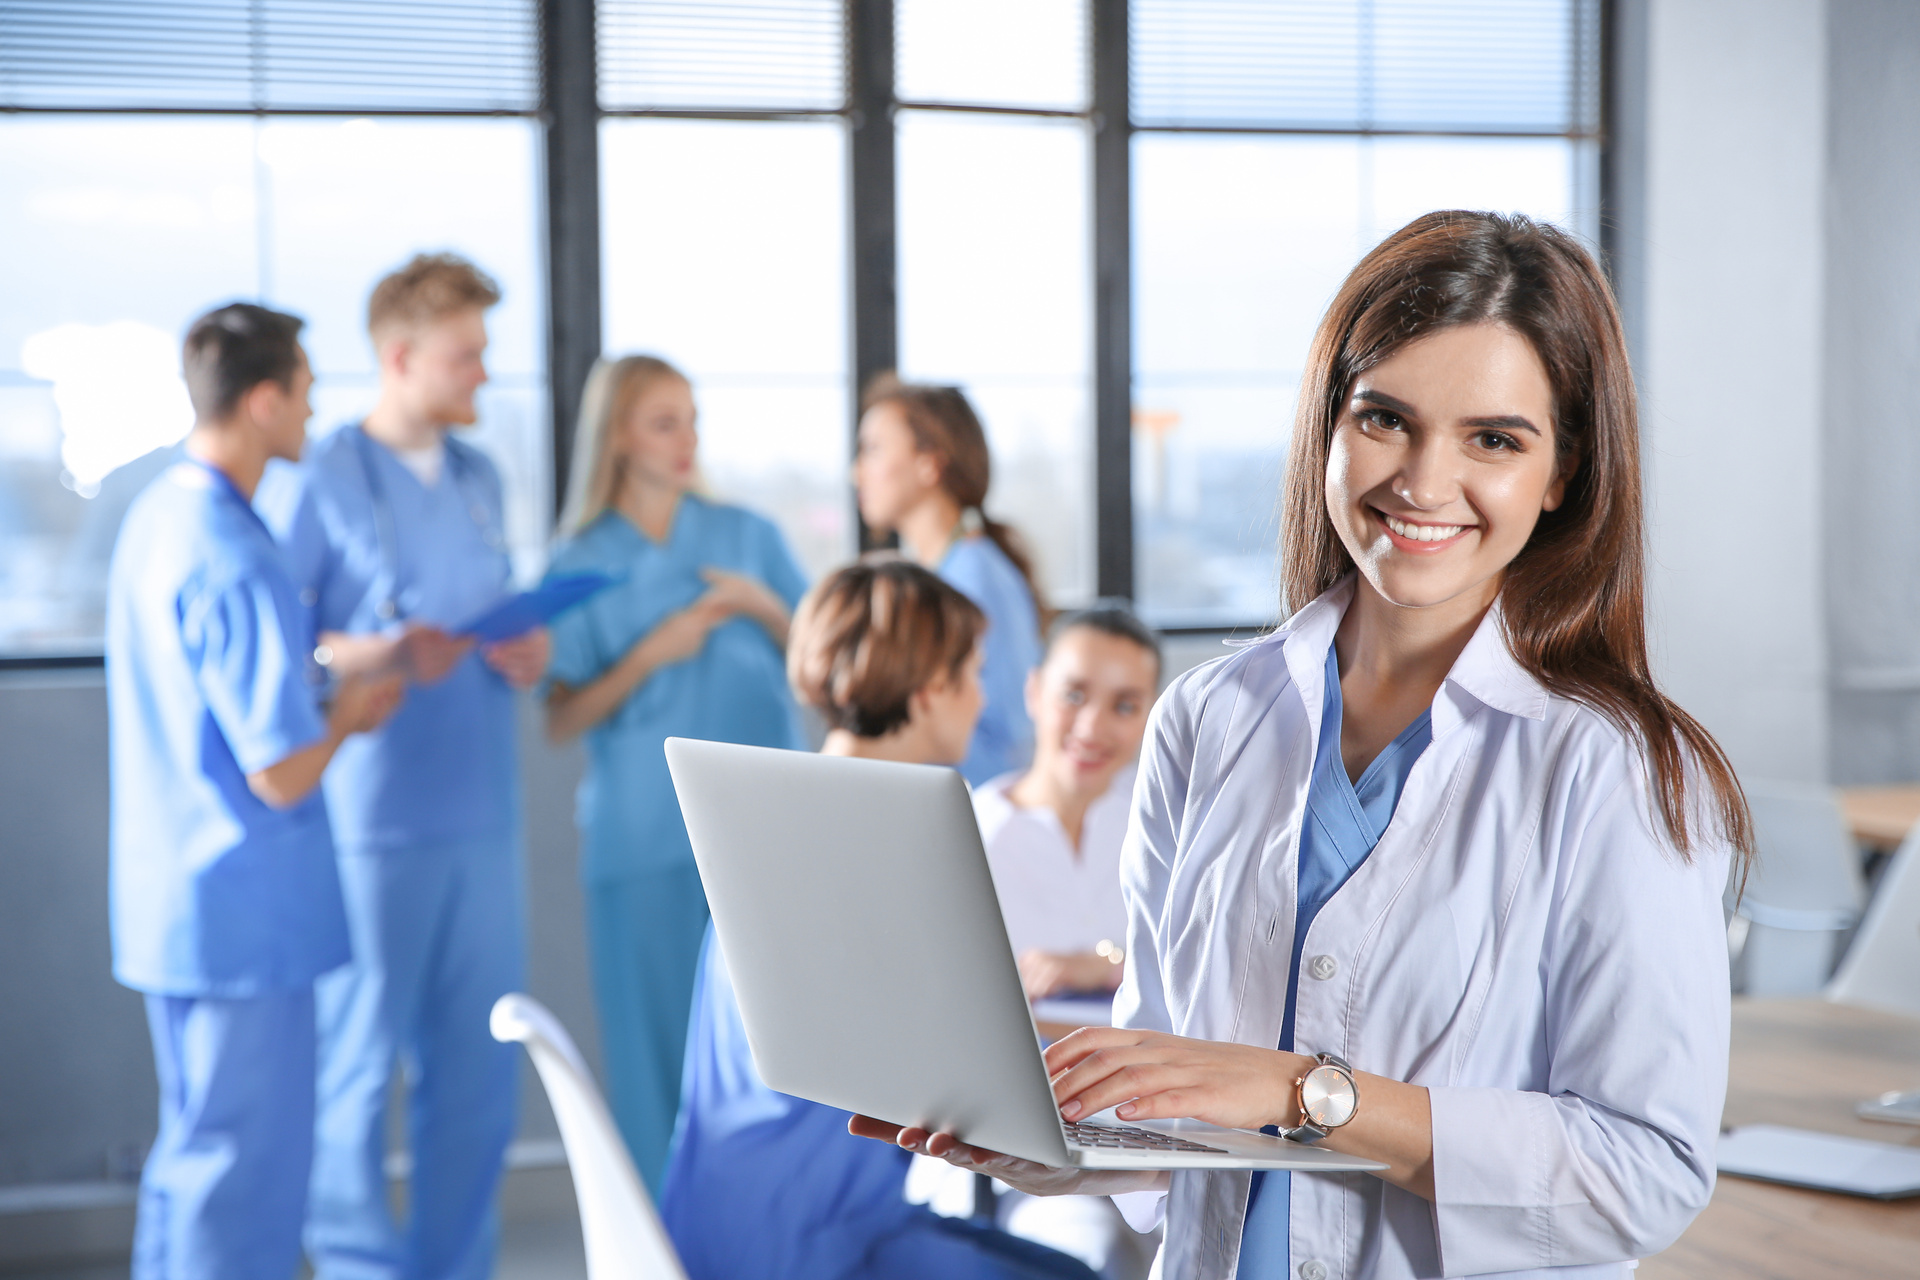 Medical student holding laptop, smiling at camera, group of nursing students in the background